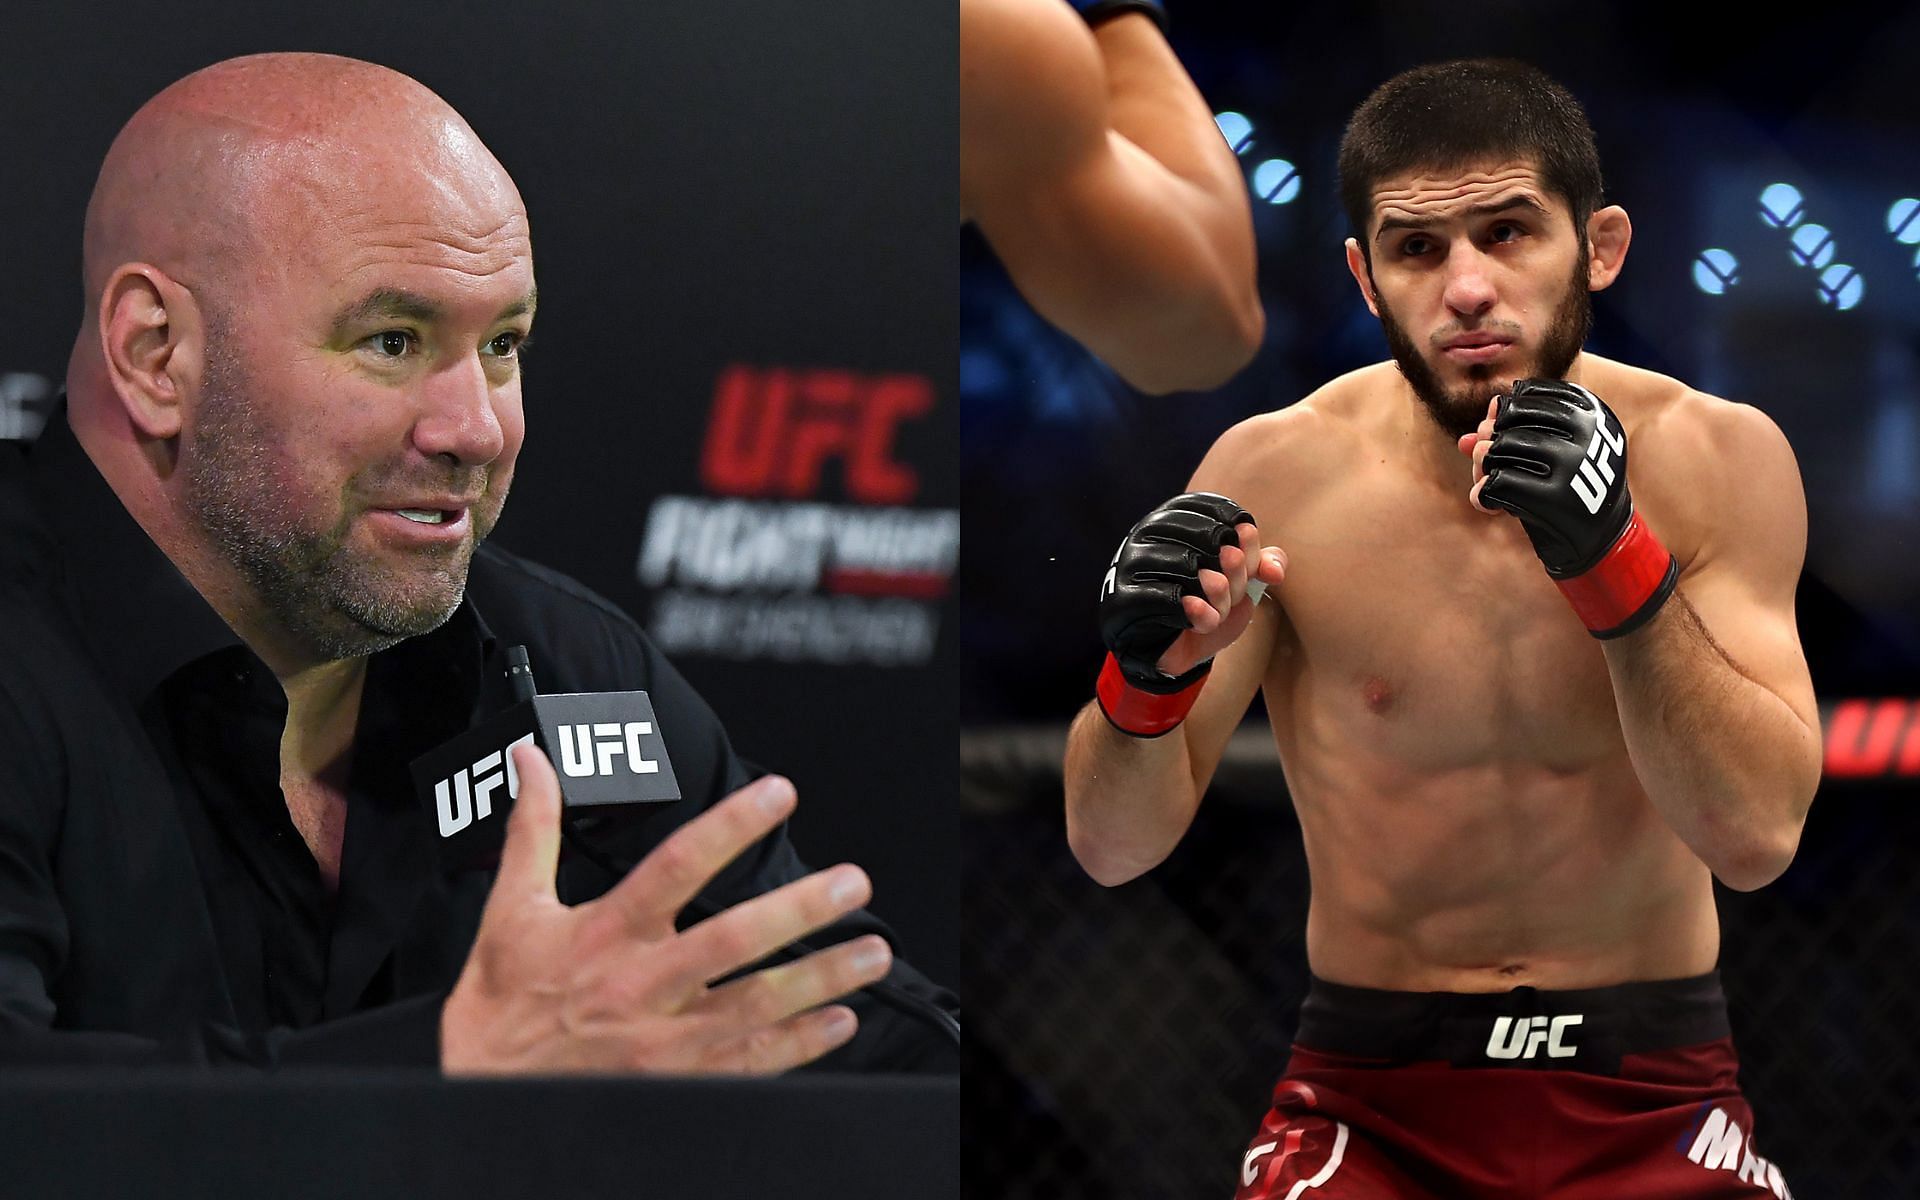 Dana White (left) and Islam Makhachev (right) (Image credits Getty Images)